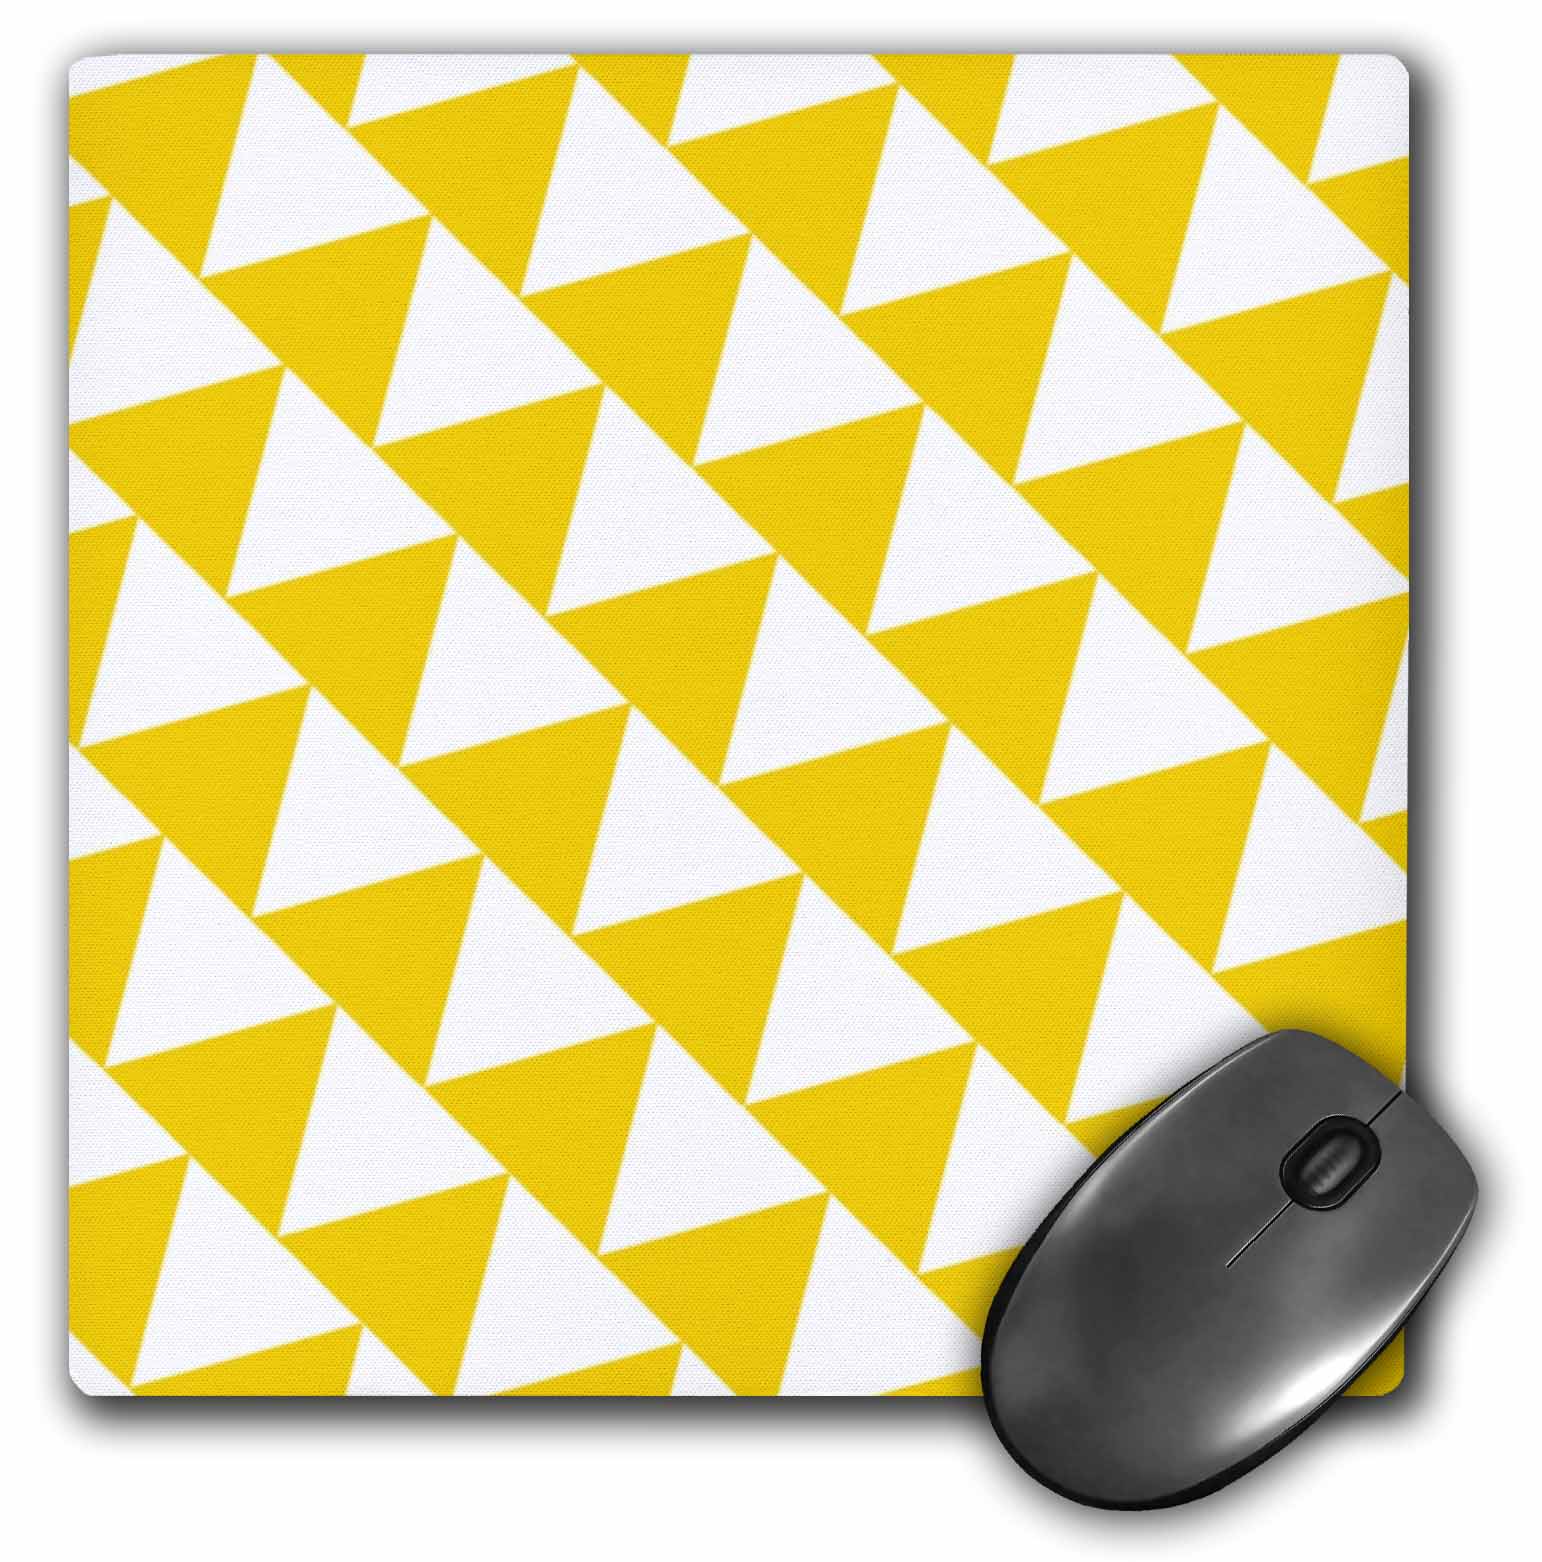 3dRose Triangle pattern - Yellow and white retro diagonal geometric design, Mouse Pad, 8 by 8 inches - image 1 of 1